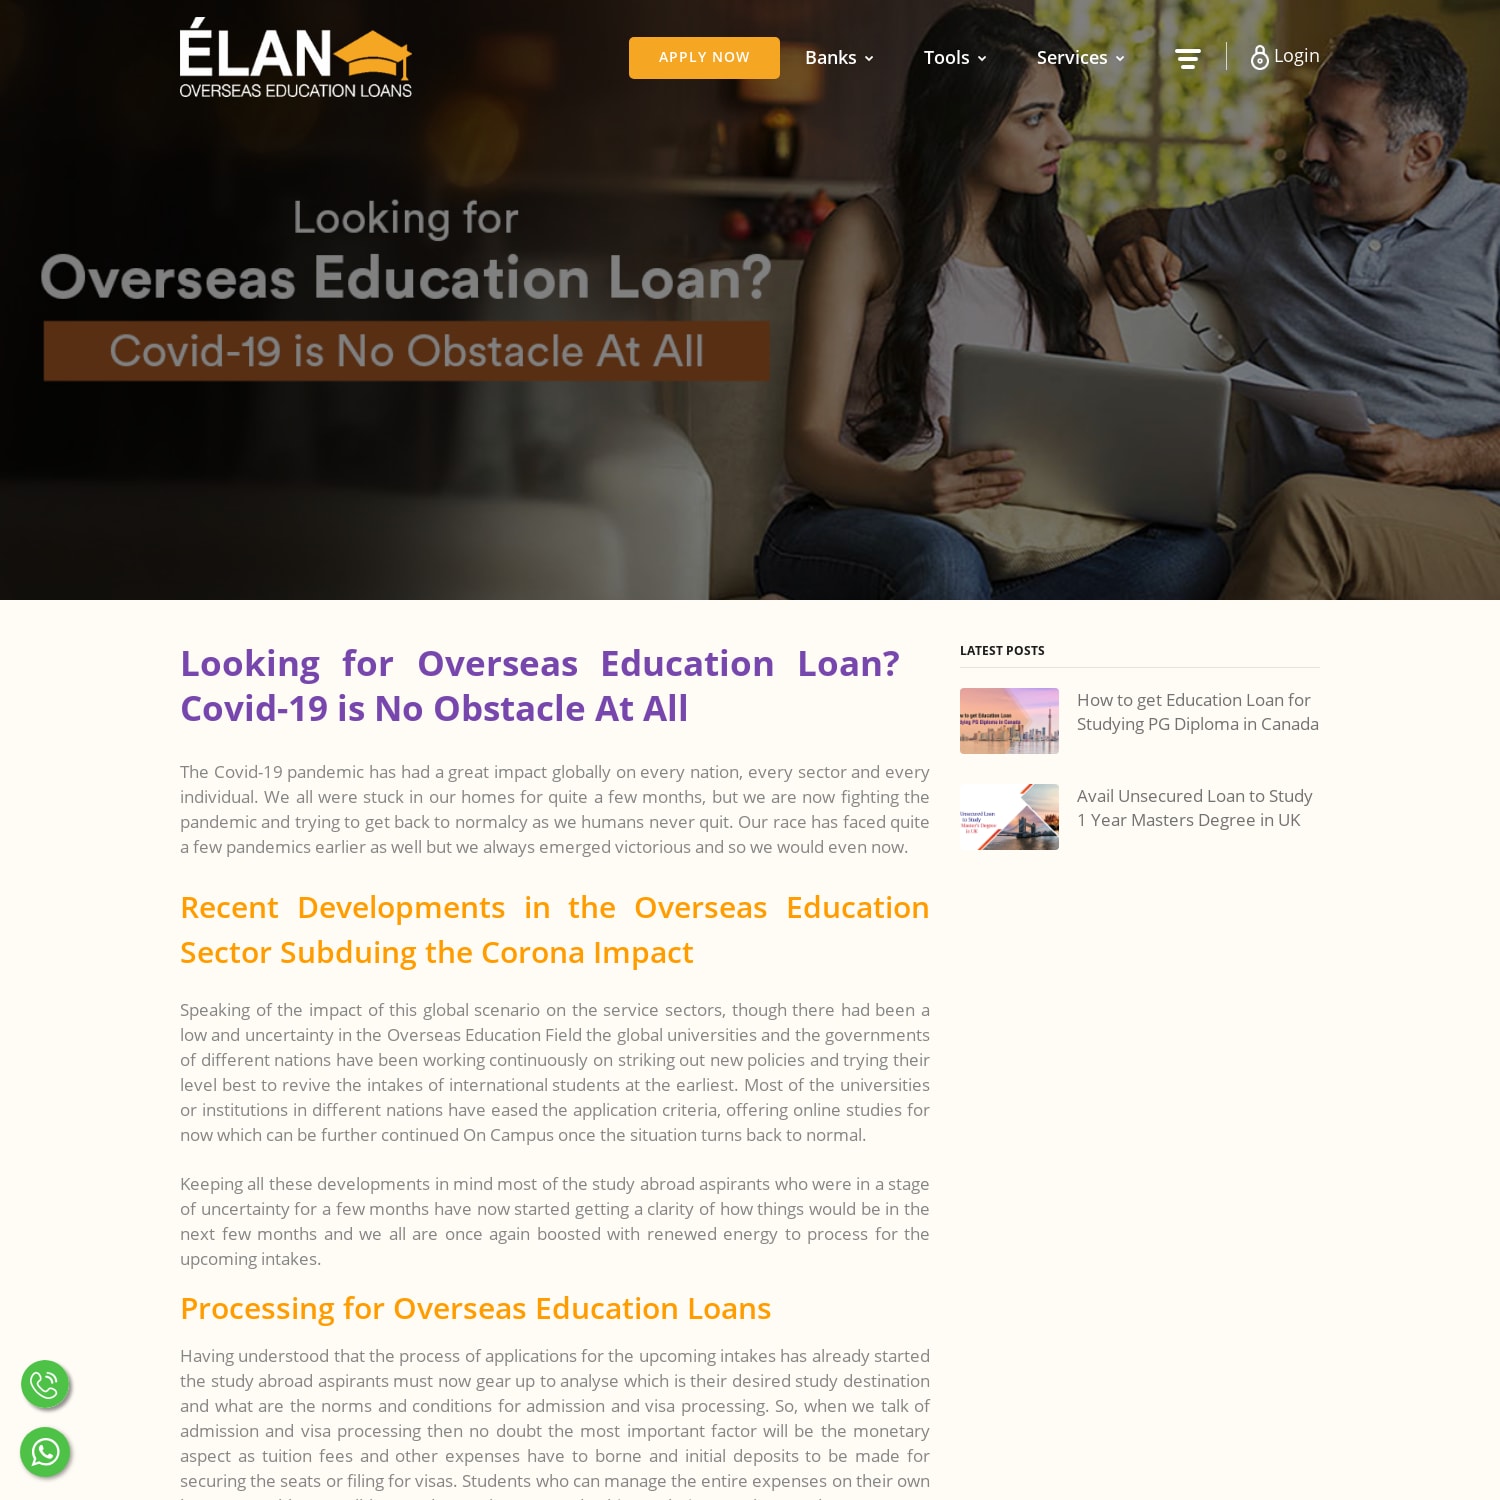 Getting Overseas Education Loans during COVID-19